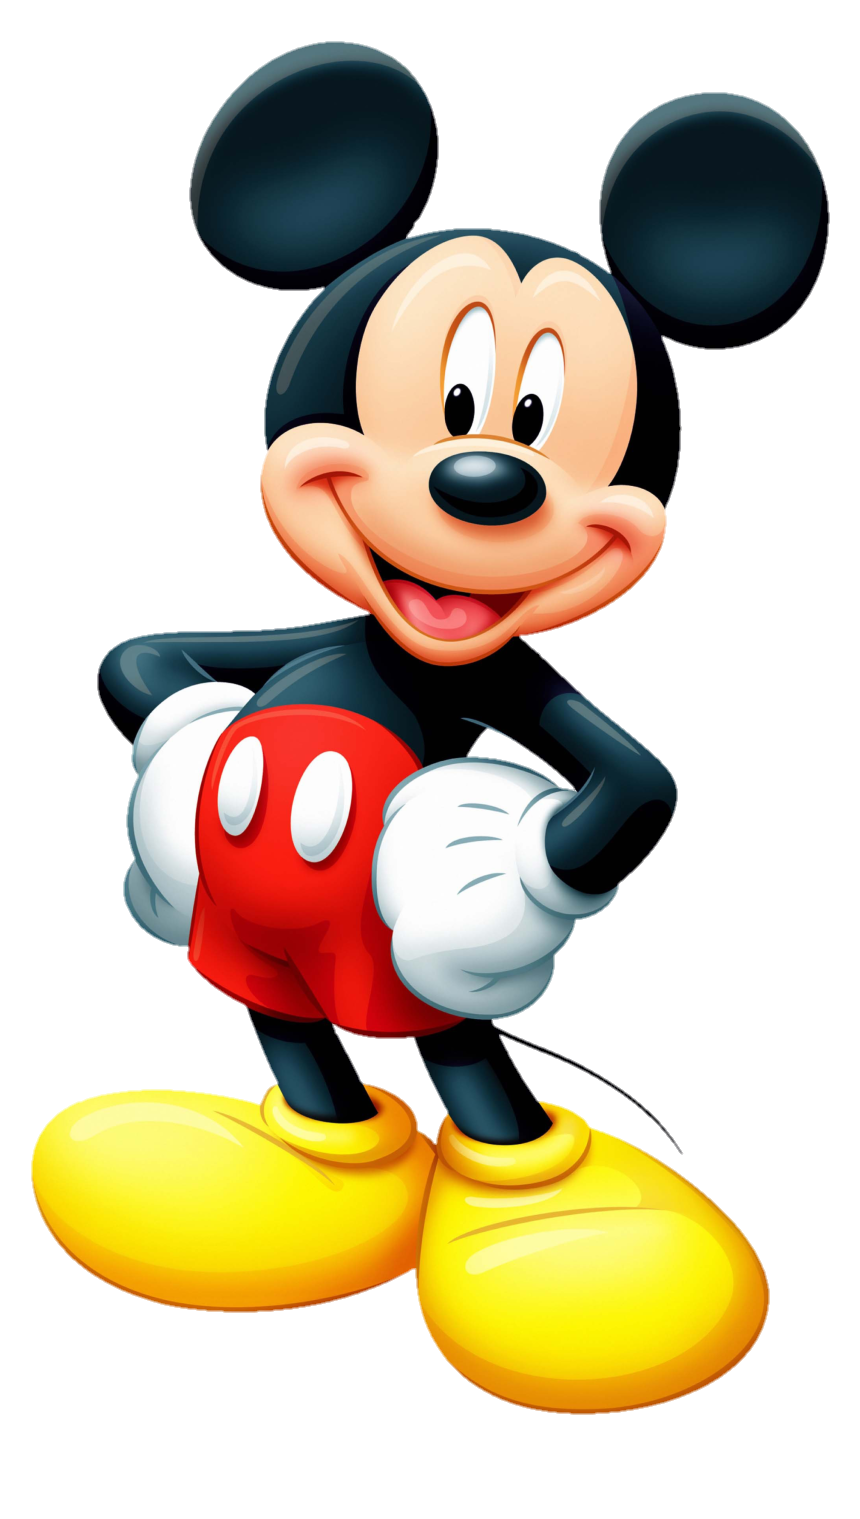 mickey-mouse-png-from-pngfre-10